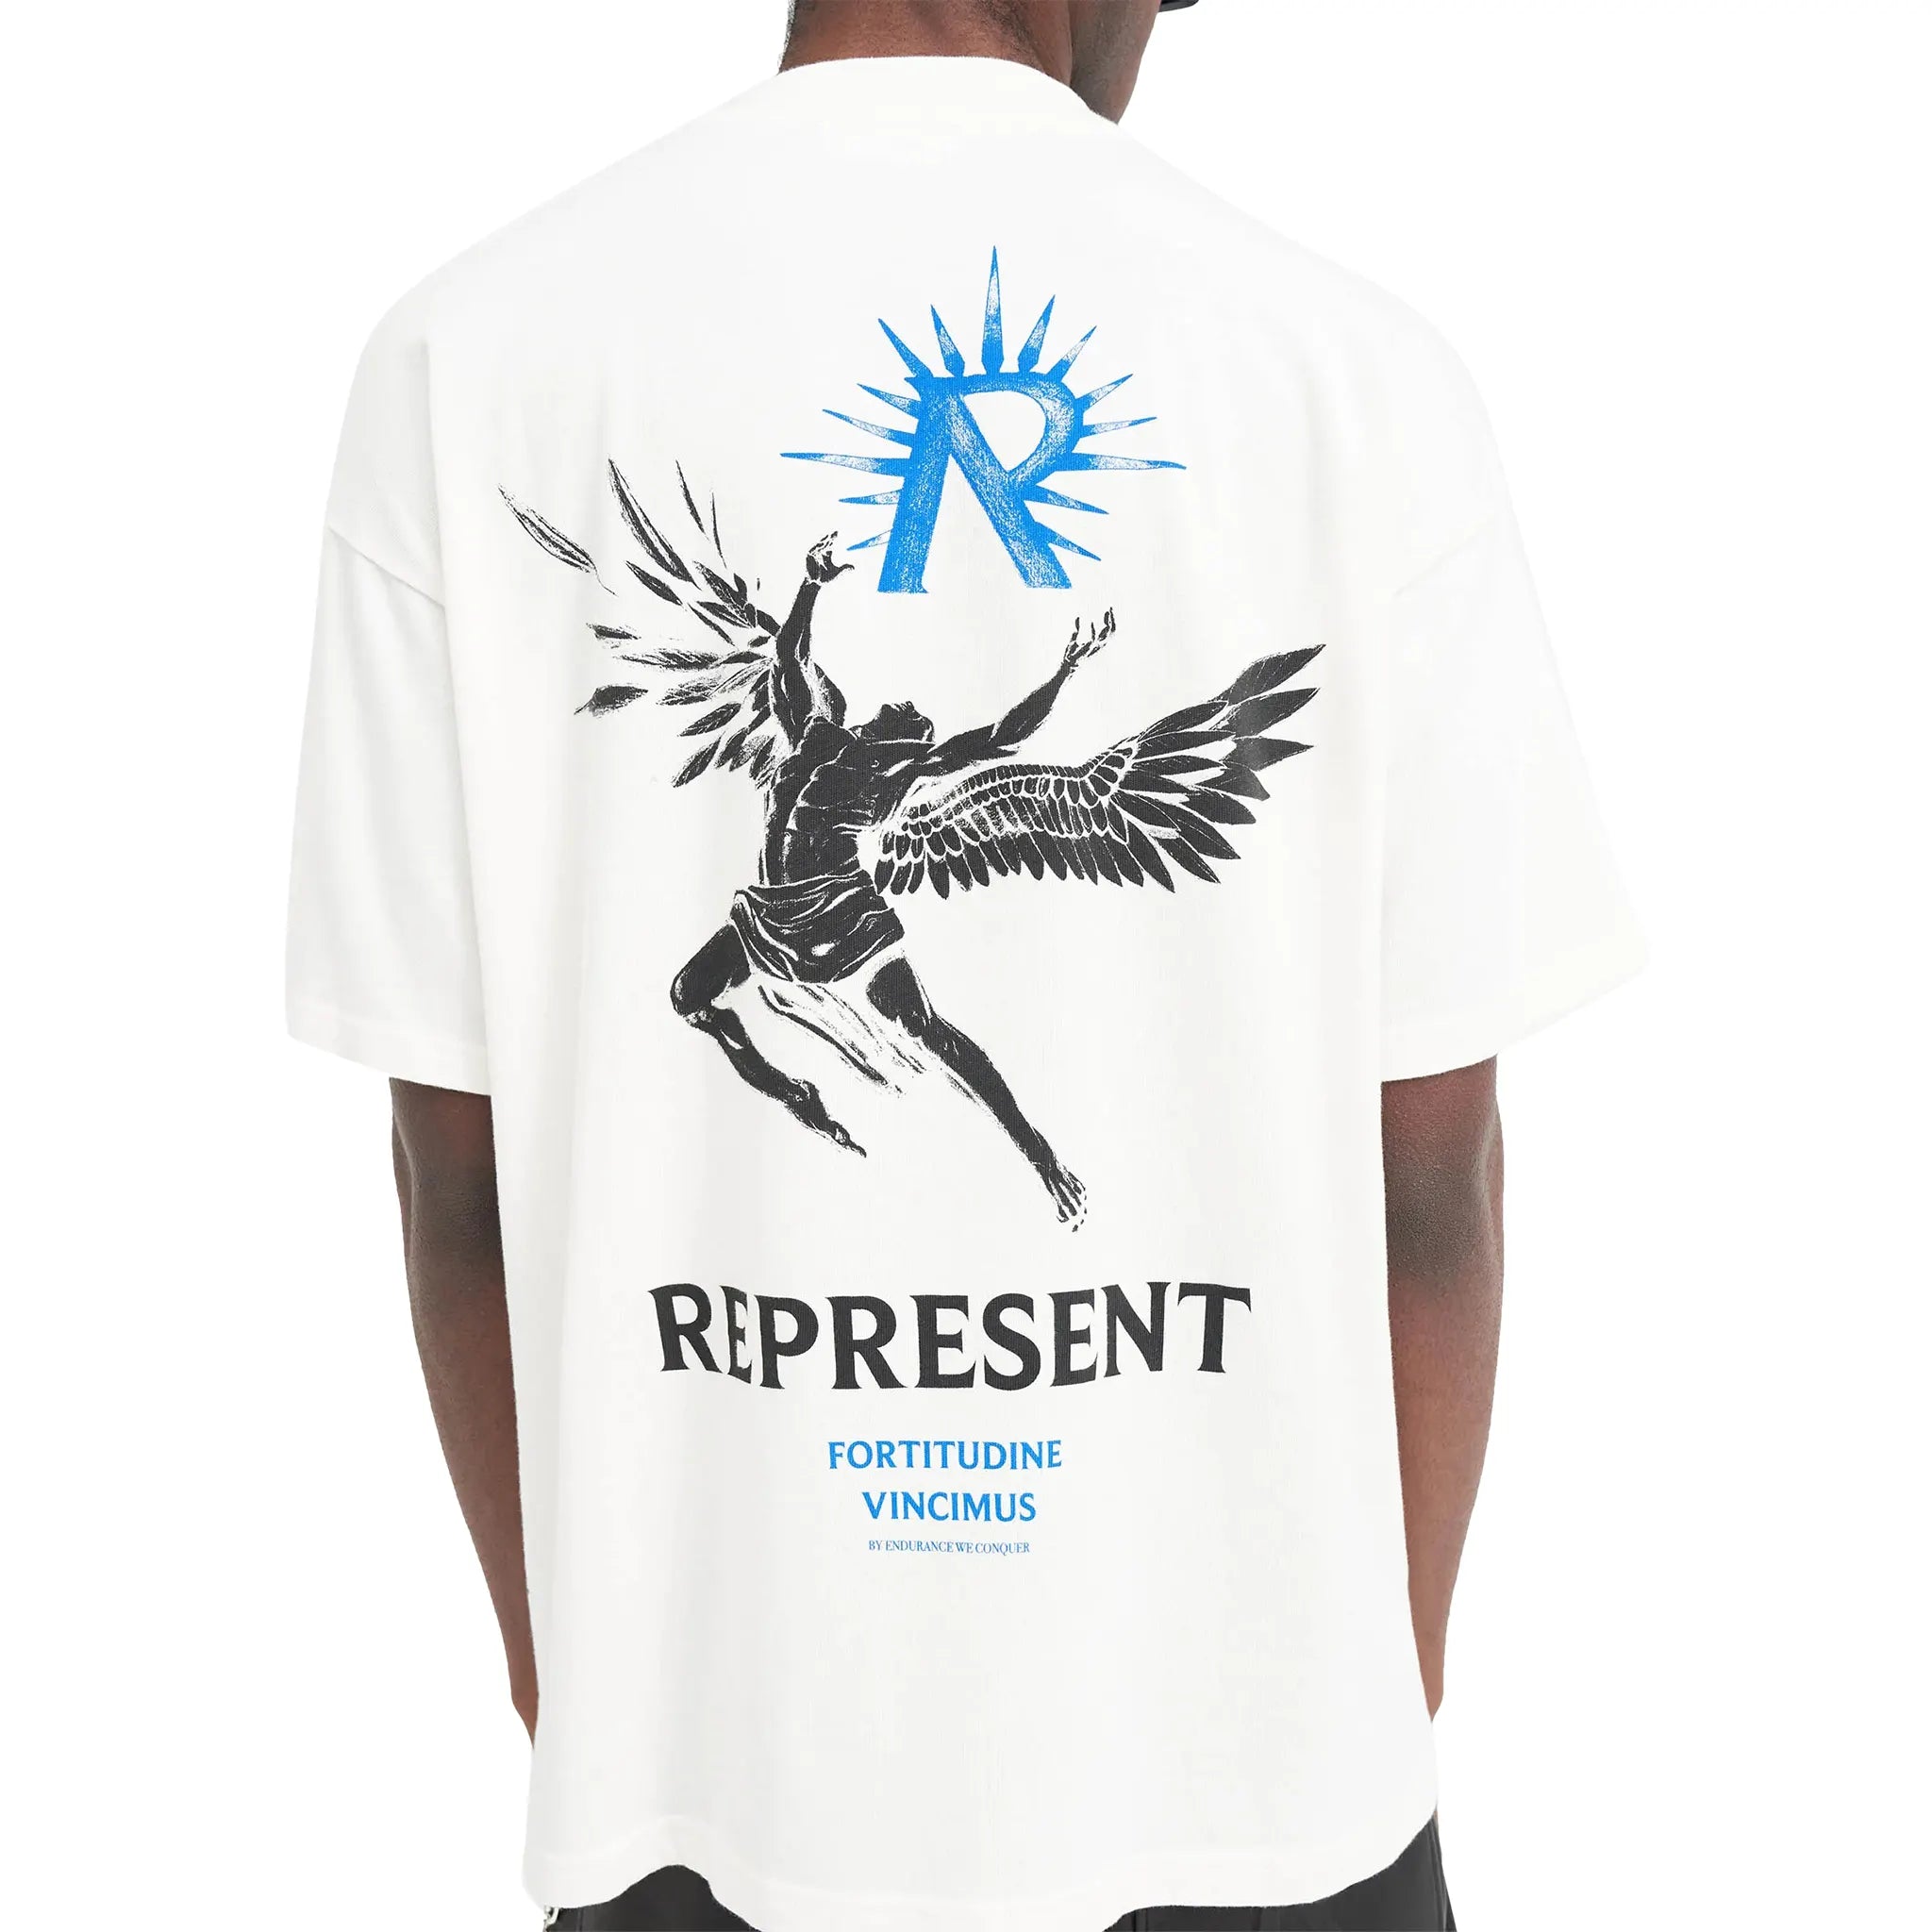 Back Detail view of Represent Icarus Flat White T Shirt MLM467-72